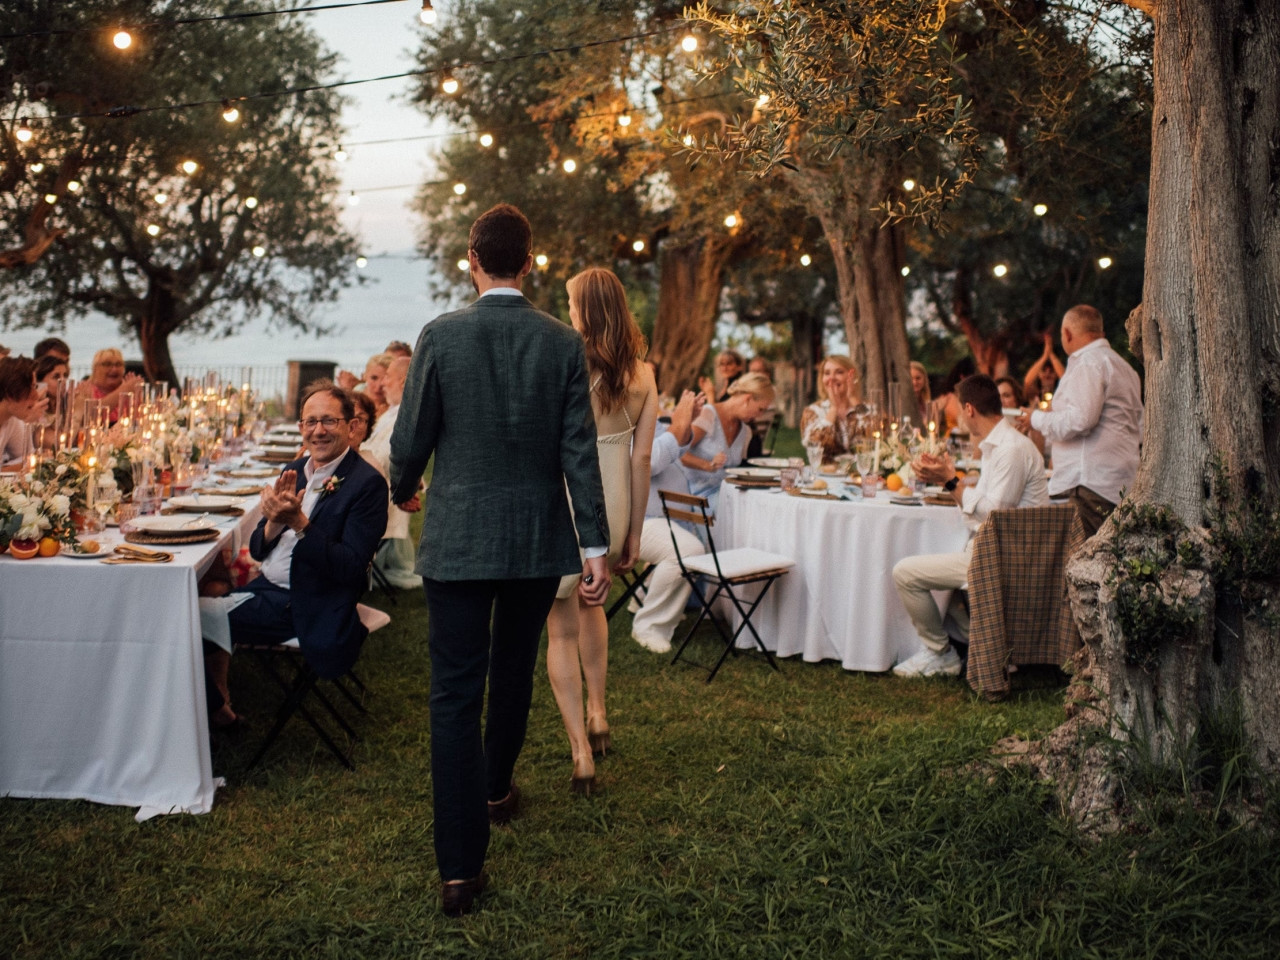 Natural Chic Wedding in Sorrento - Sorrento Wedding Catering